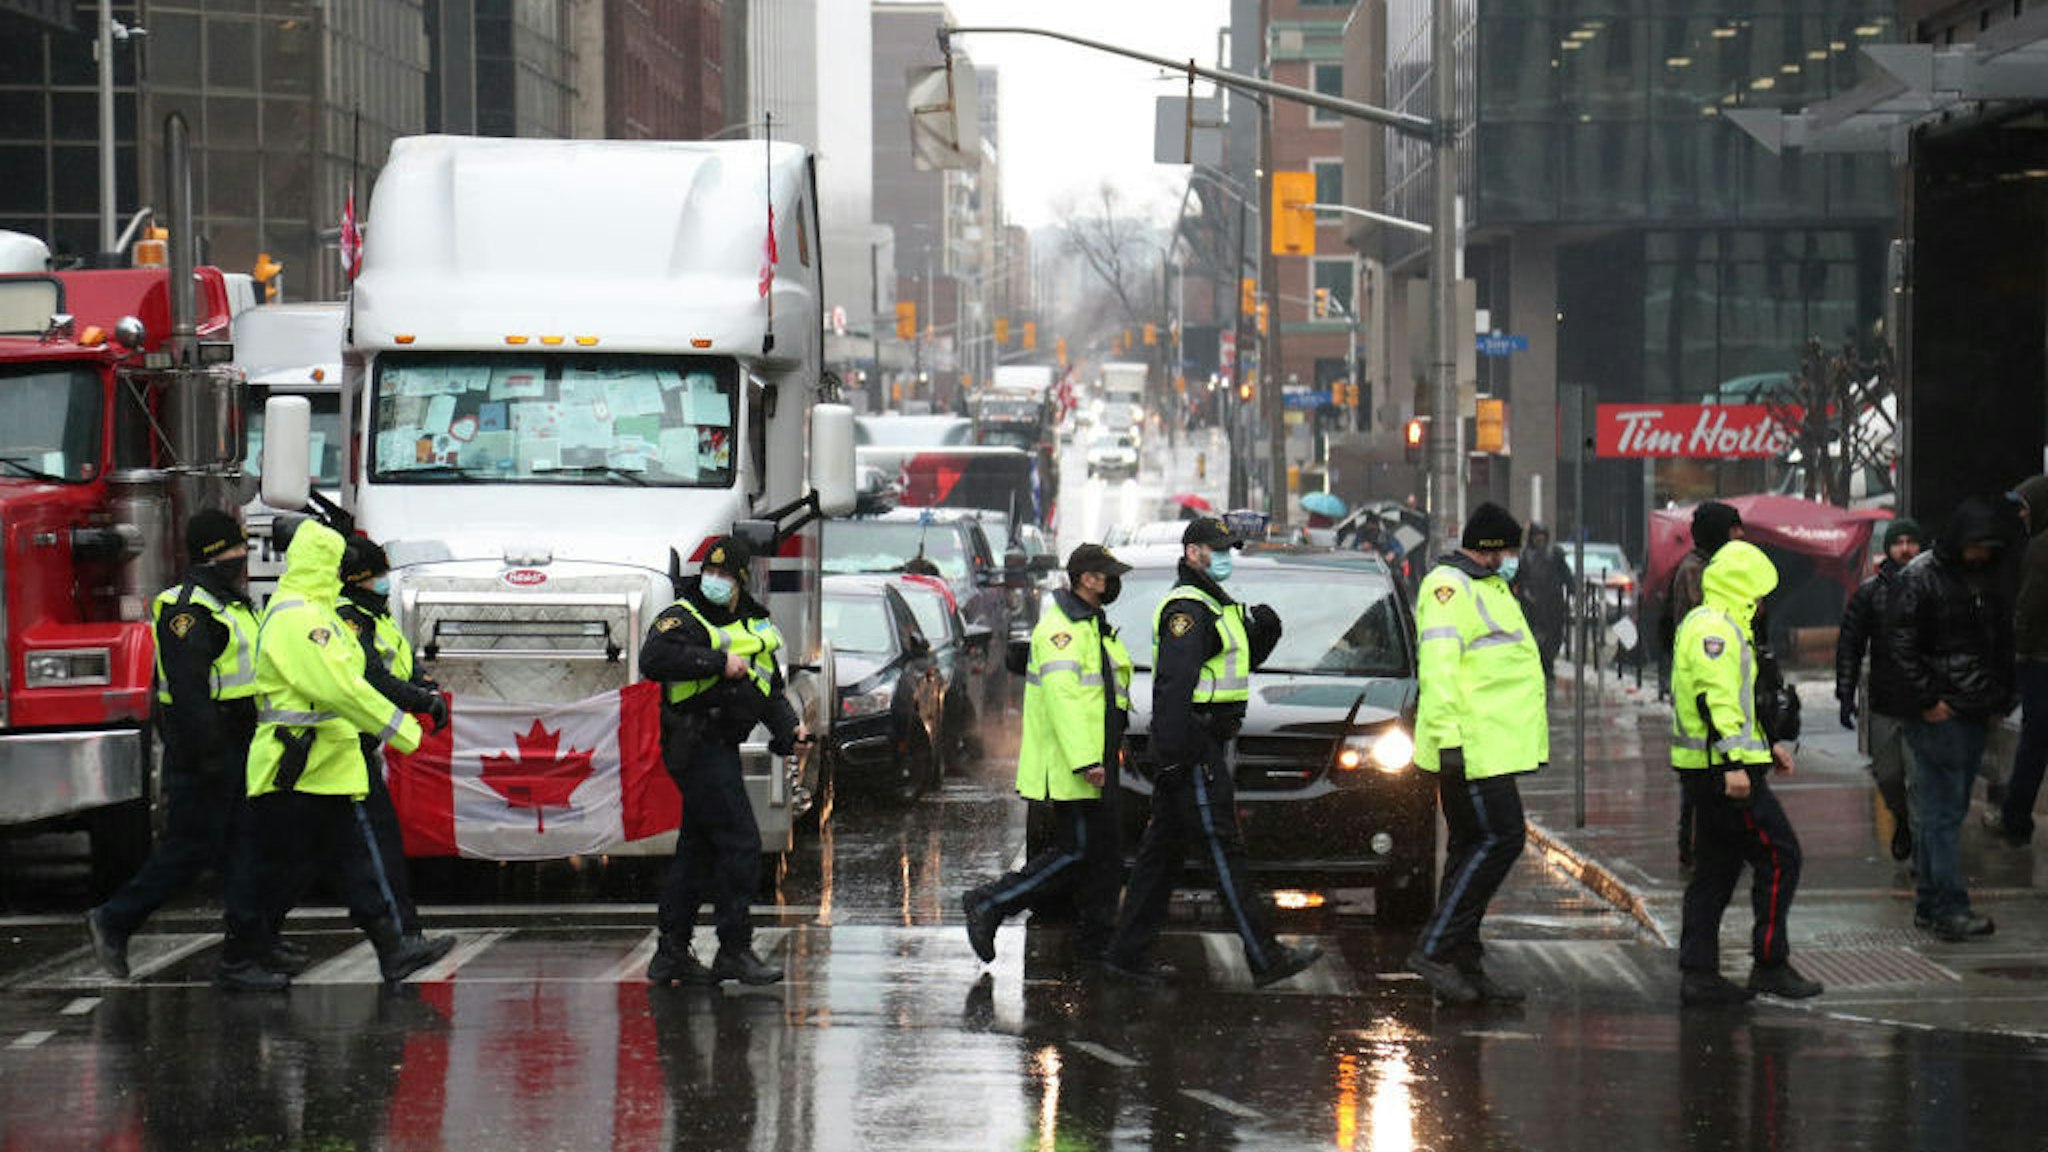 Police officers walk past trucks blocking a street during a demonstration in Ottawa, Ontario, Canada, on Thursday, Feb. 17, 2022. Police told demonstrators camped out on the streets of Canada’s capital that they must leave or be subject to arrest under new emergency powers invoked by Prime Minister Justin Trudeau and Ontario’s provincial government. Photographer: David Kawai/Bloomberg